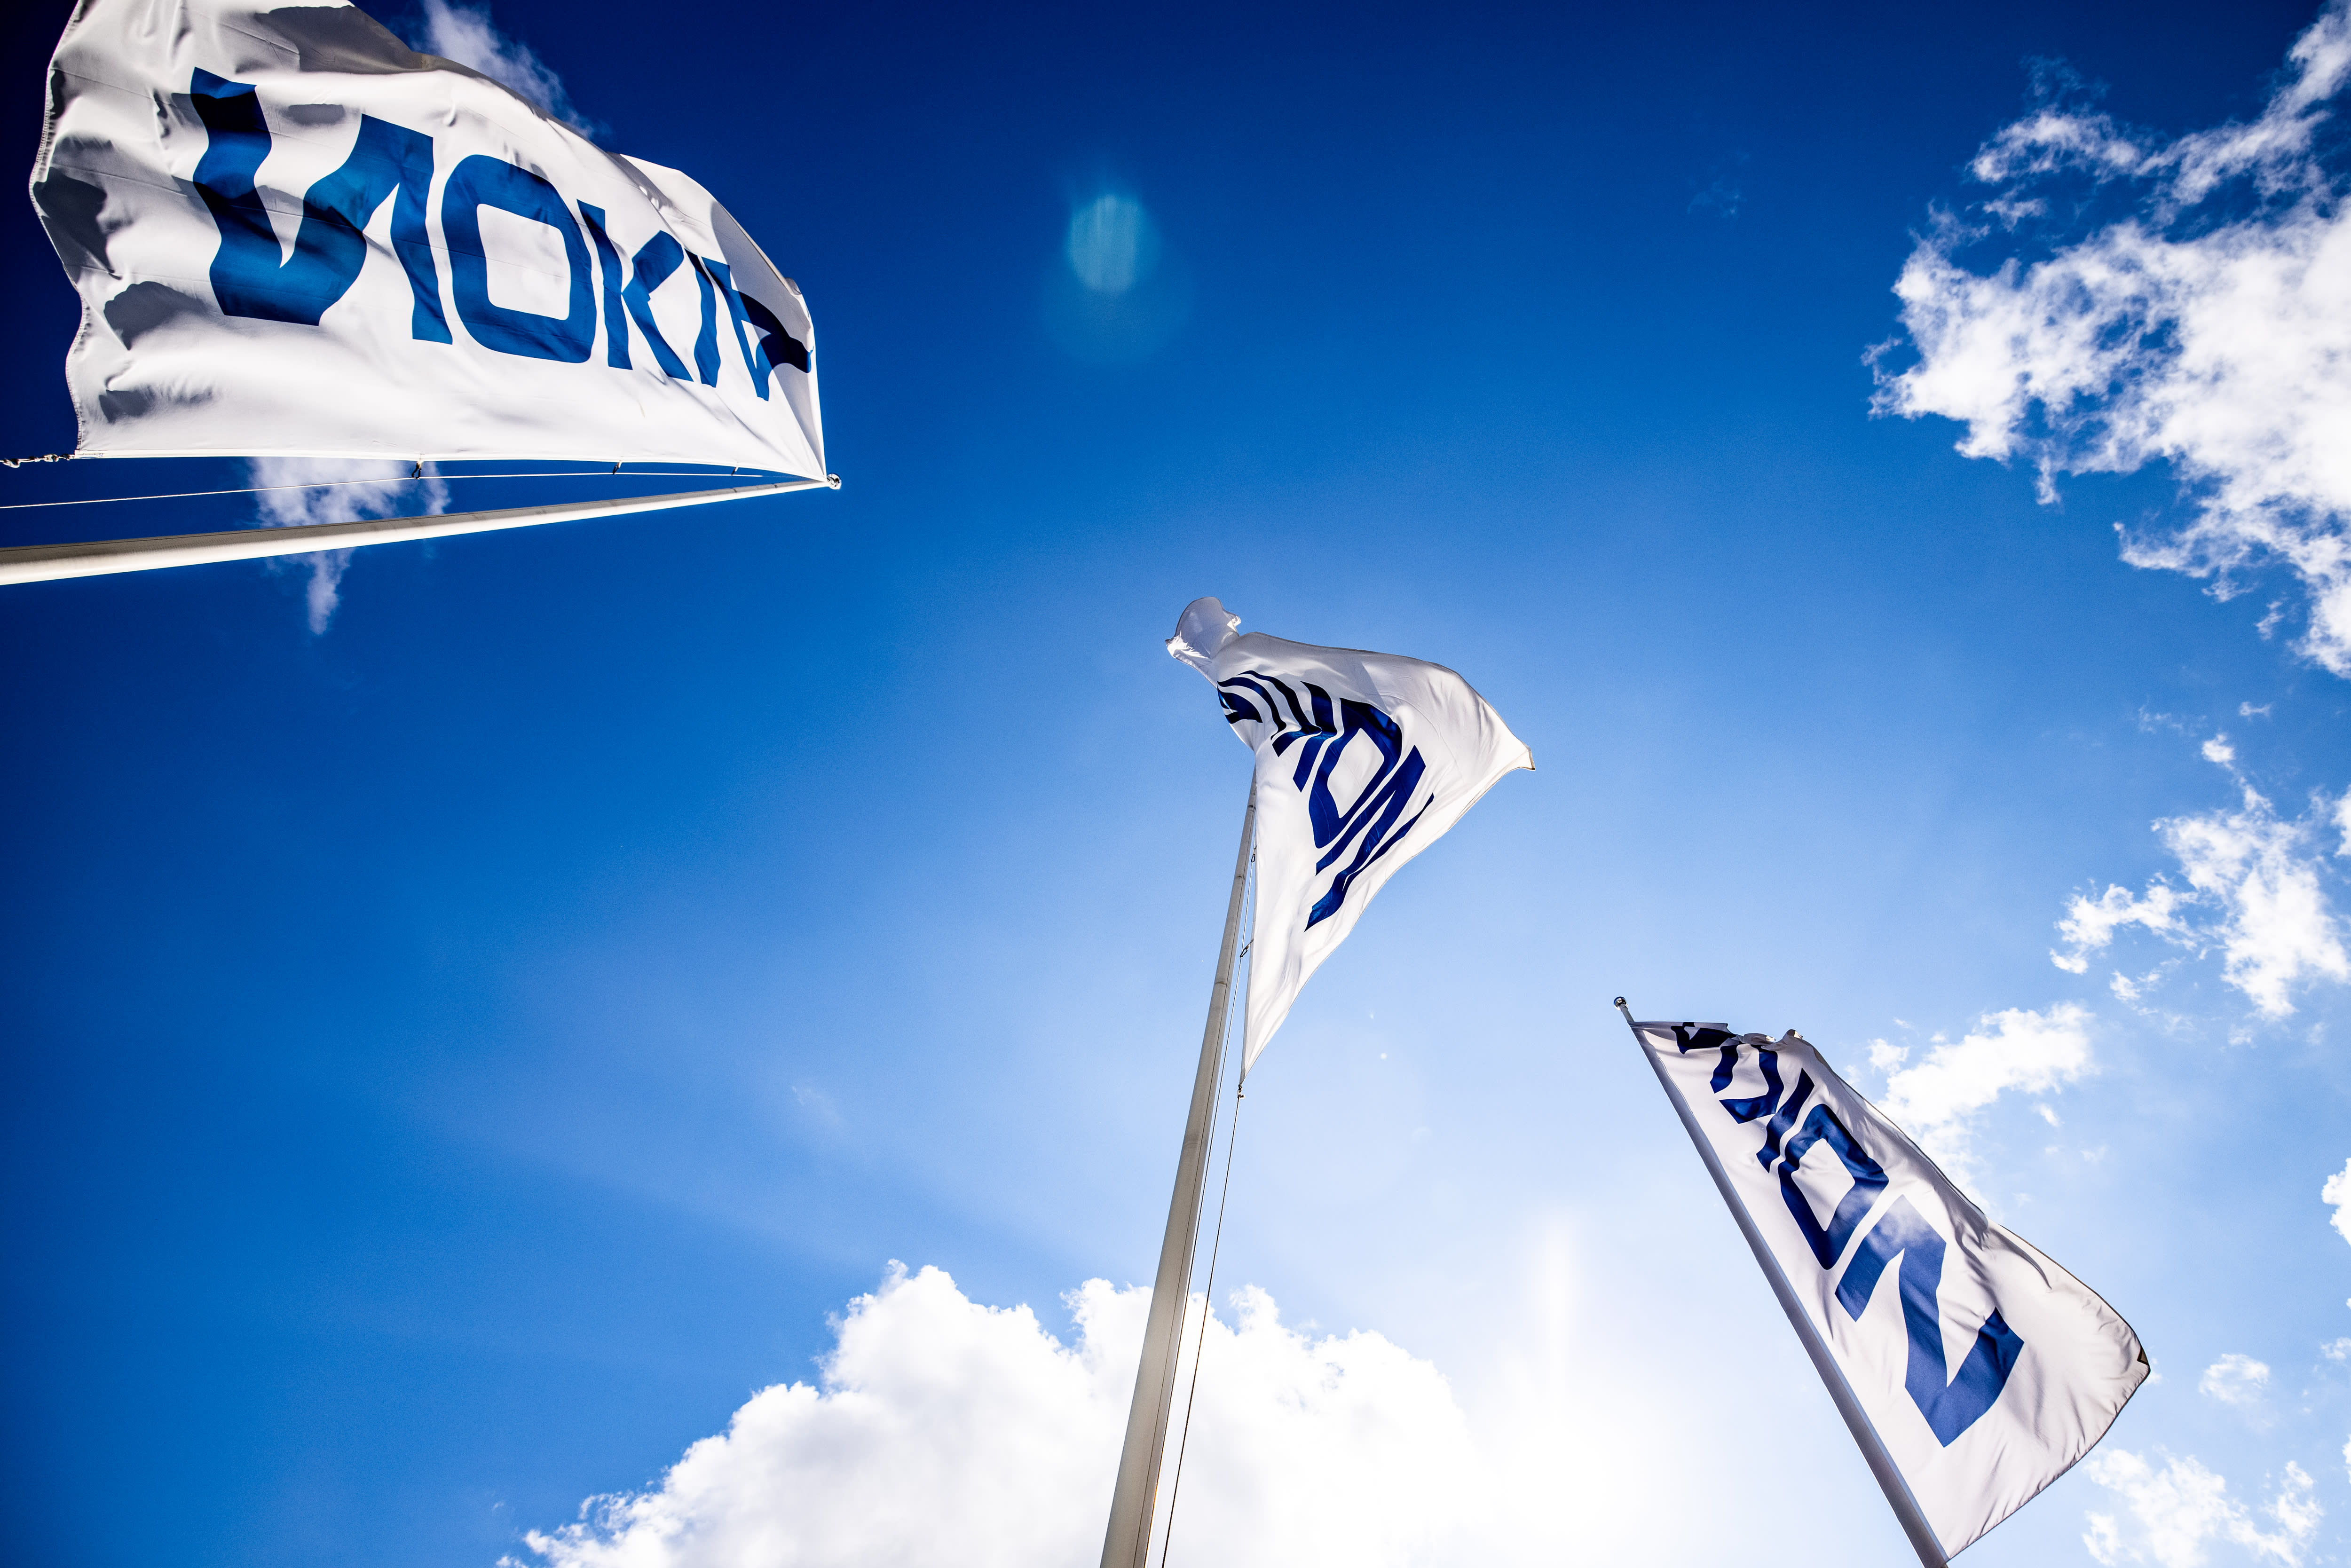 Nokia announced the loss of jobs in Finland and issued a profit warning